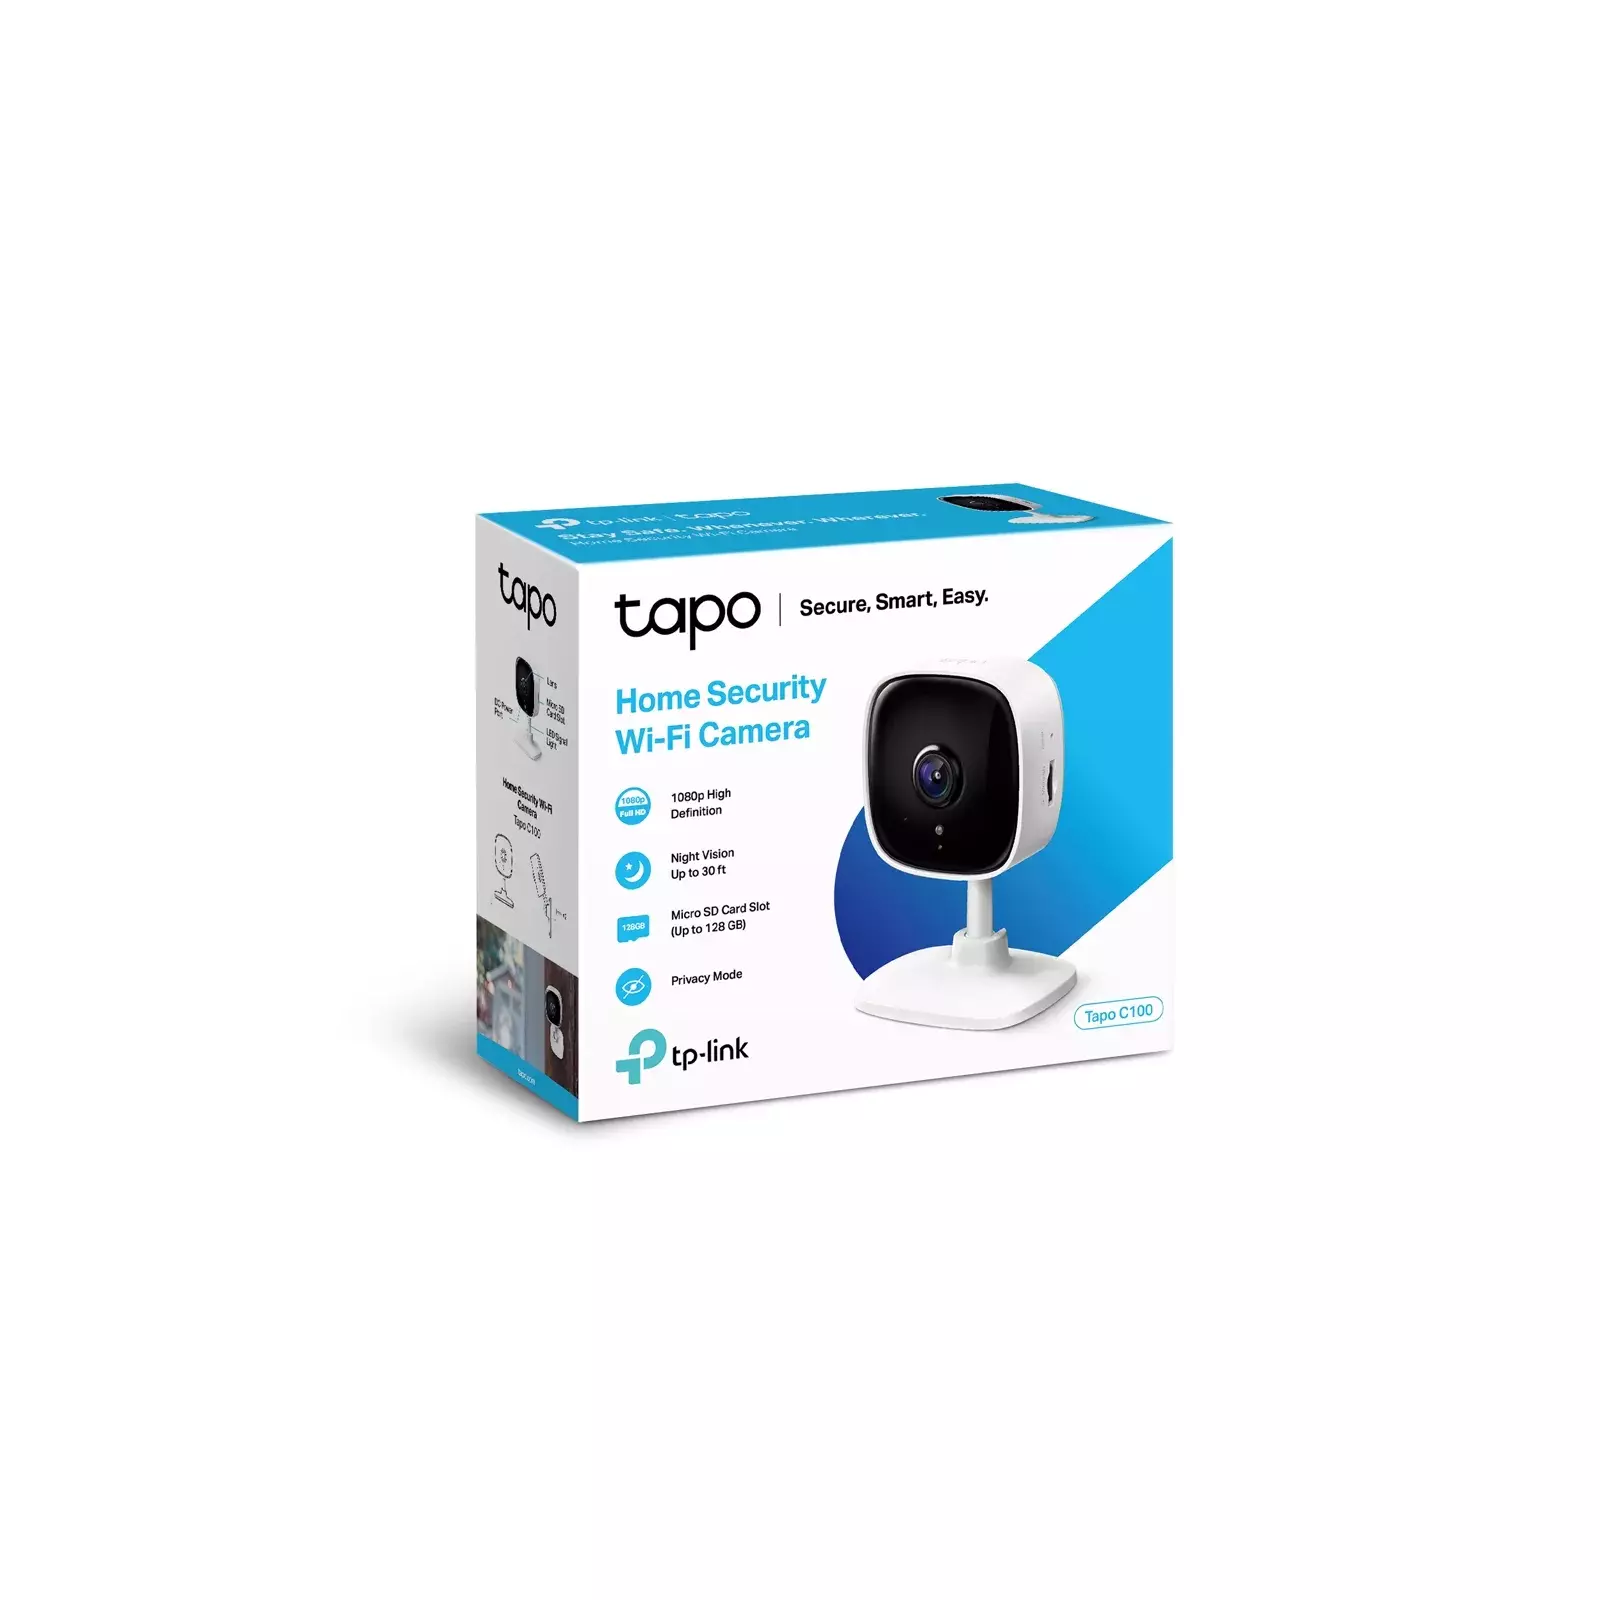 TP-LINK TAPOC110 Photo 5